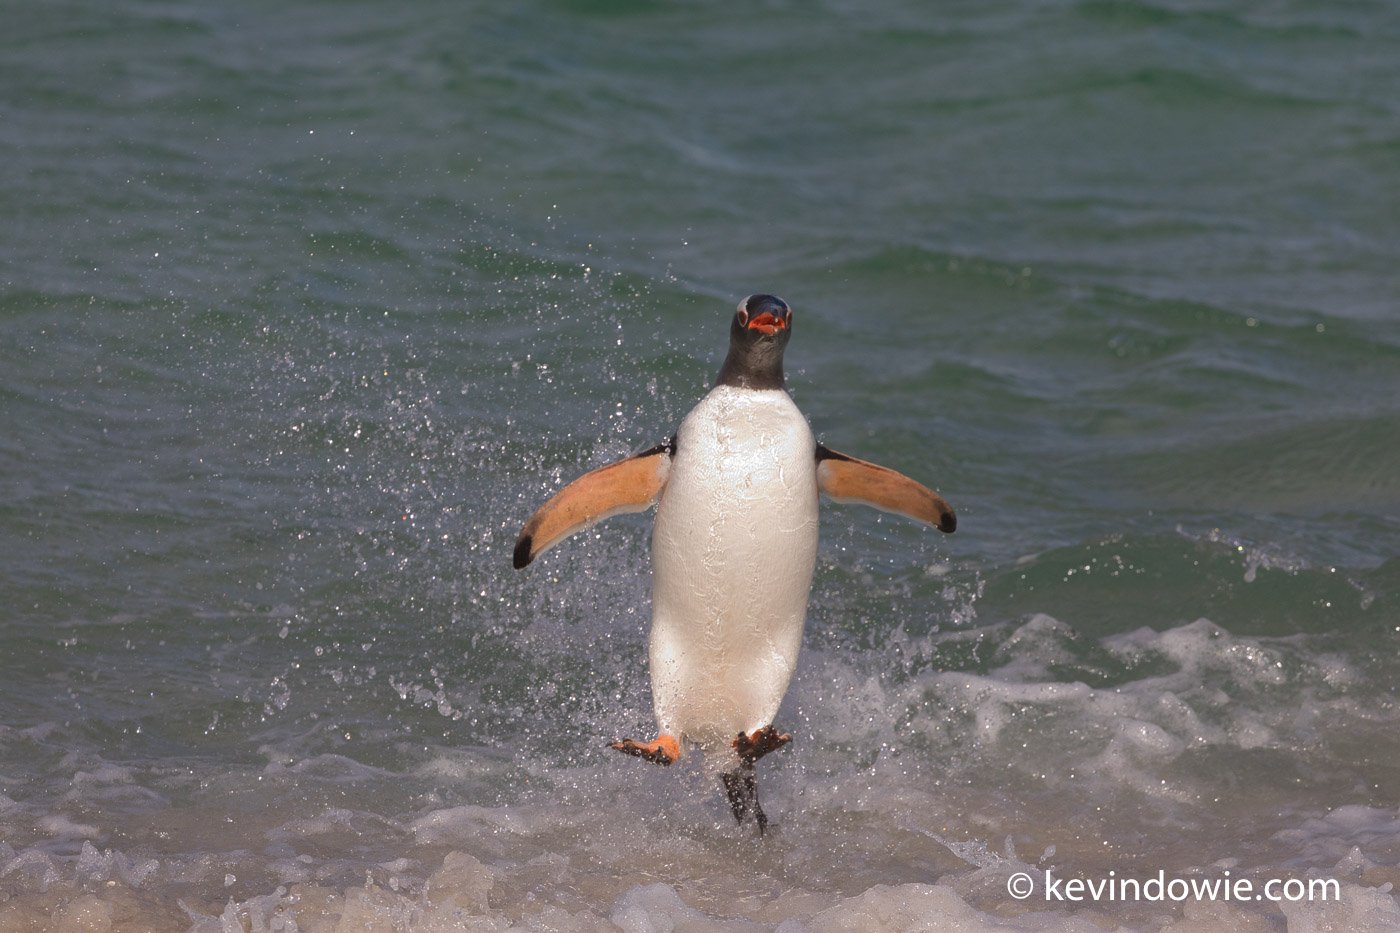 Gentoo Penguin launches itself from the water